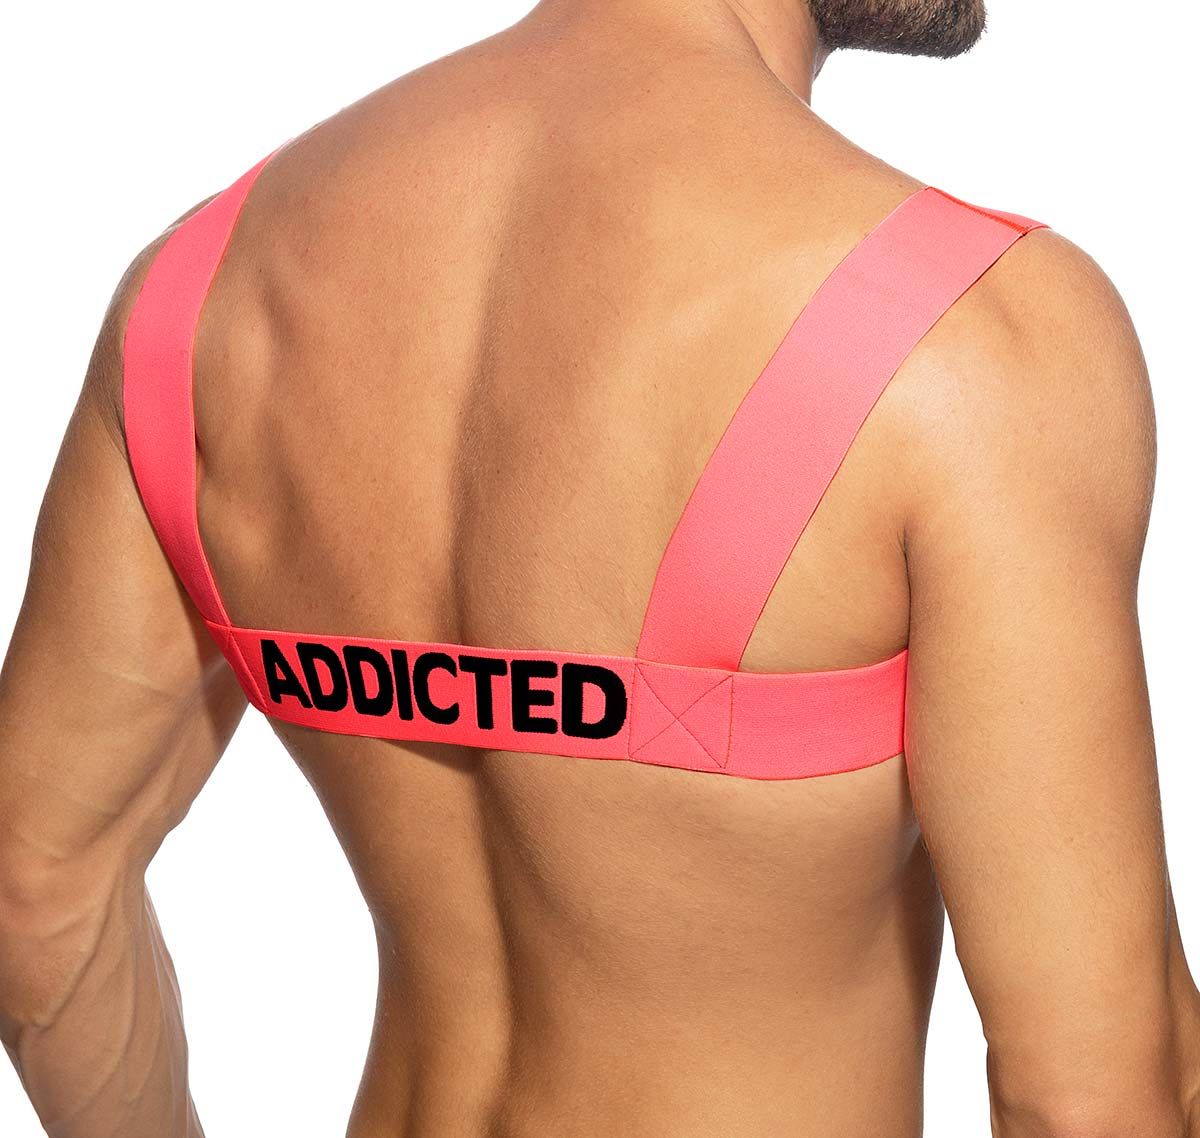 Addicted Harnais NEON ADDICTED HARNESS AD1127, rose fluo